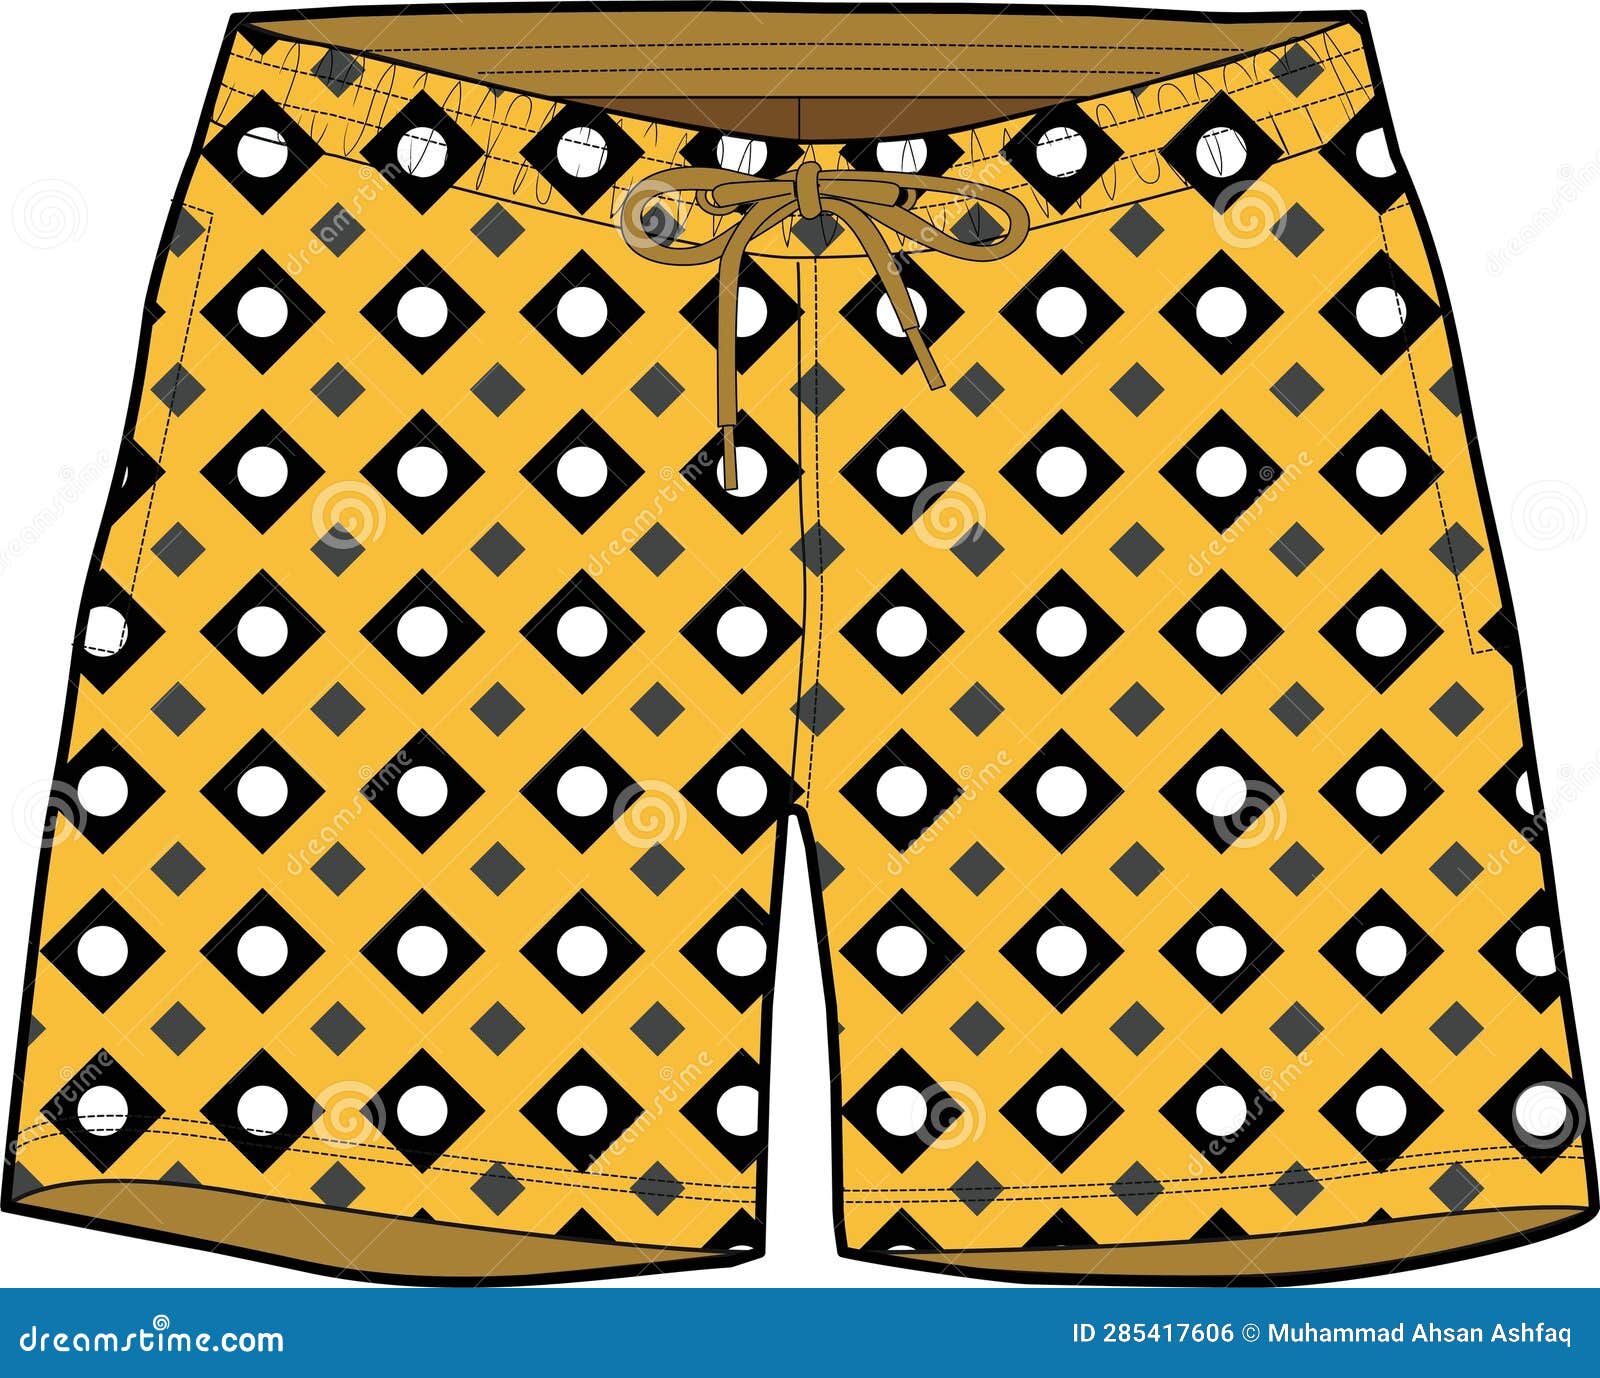 Man and Boys Swim Shorts Knicker Beach and Casual Wear Stock Vector ...